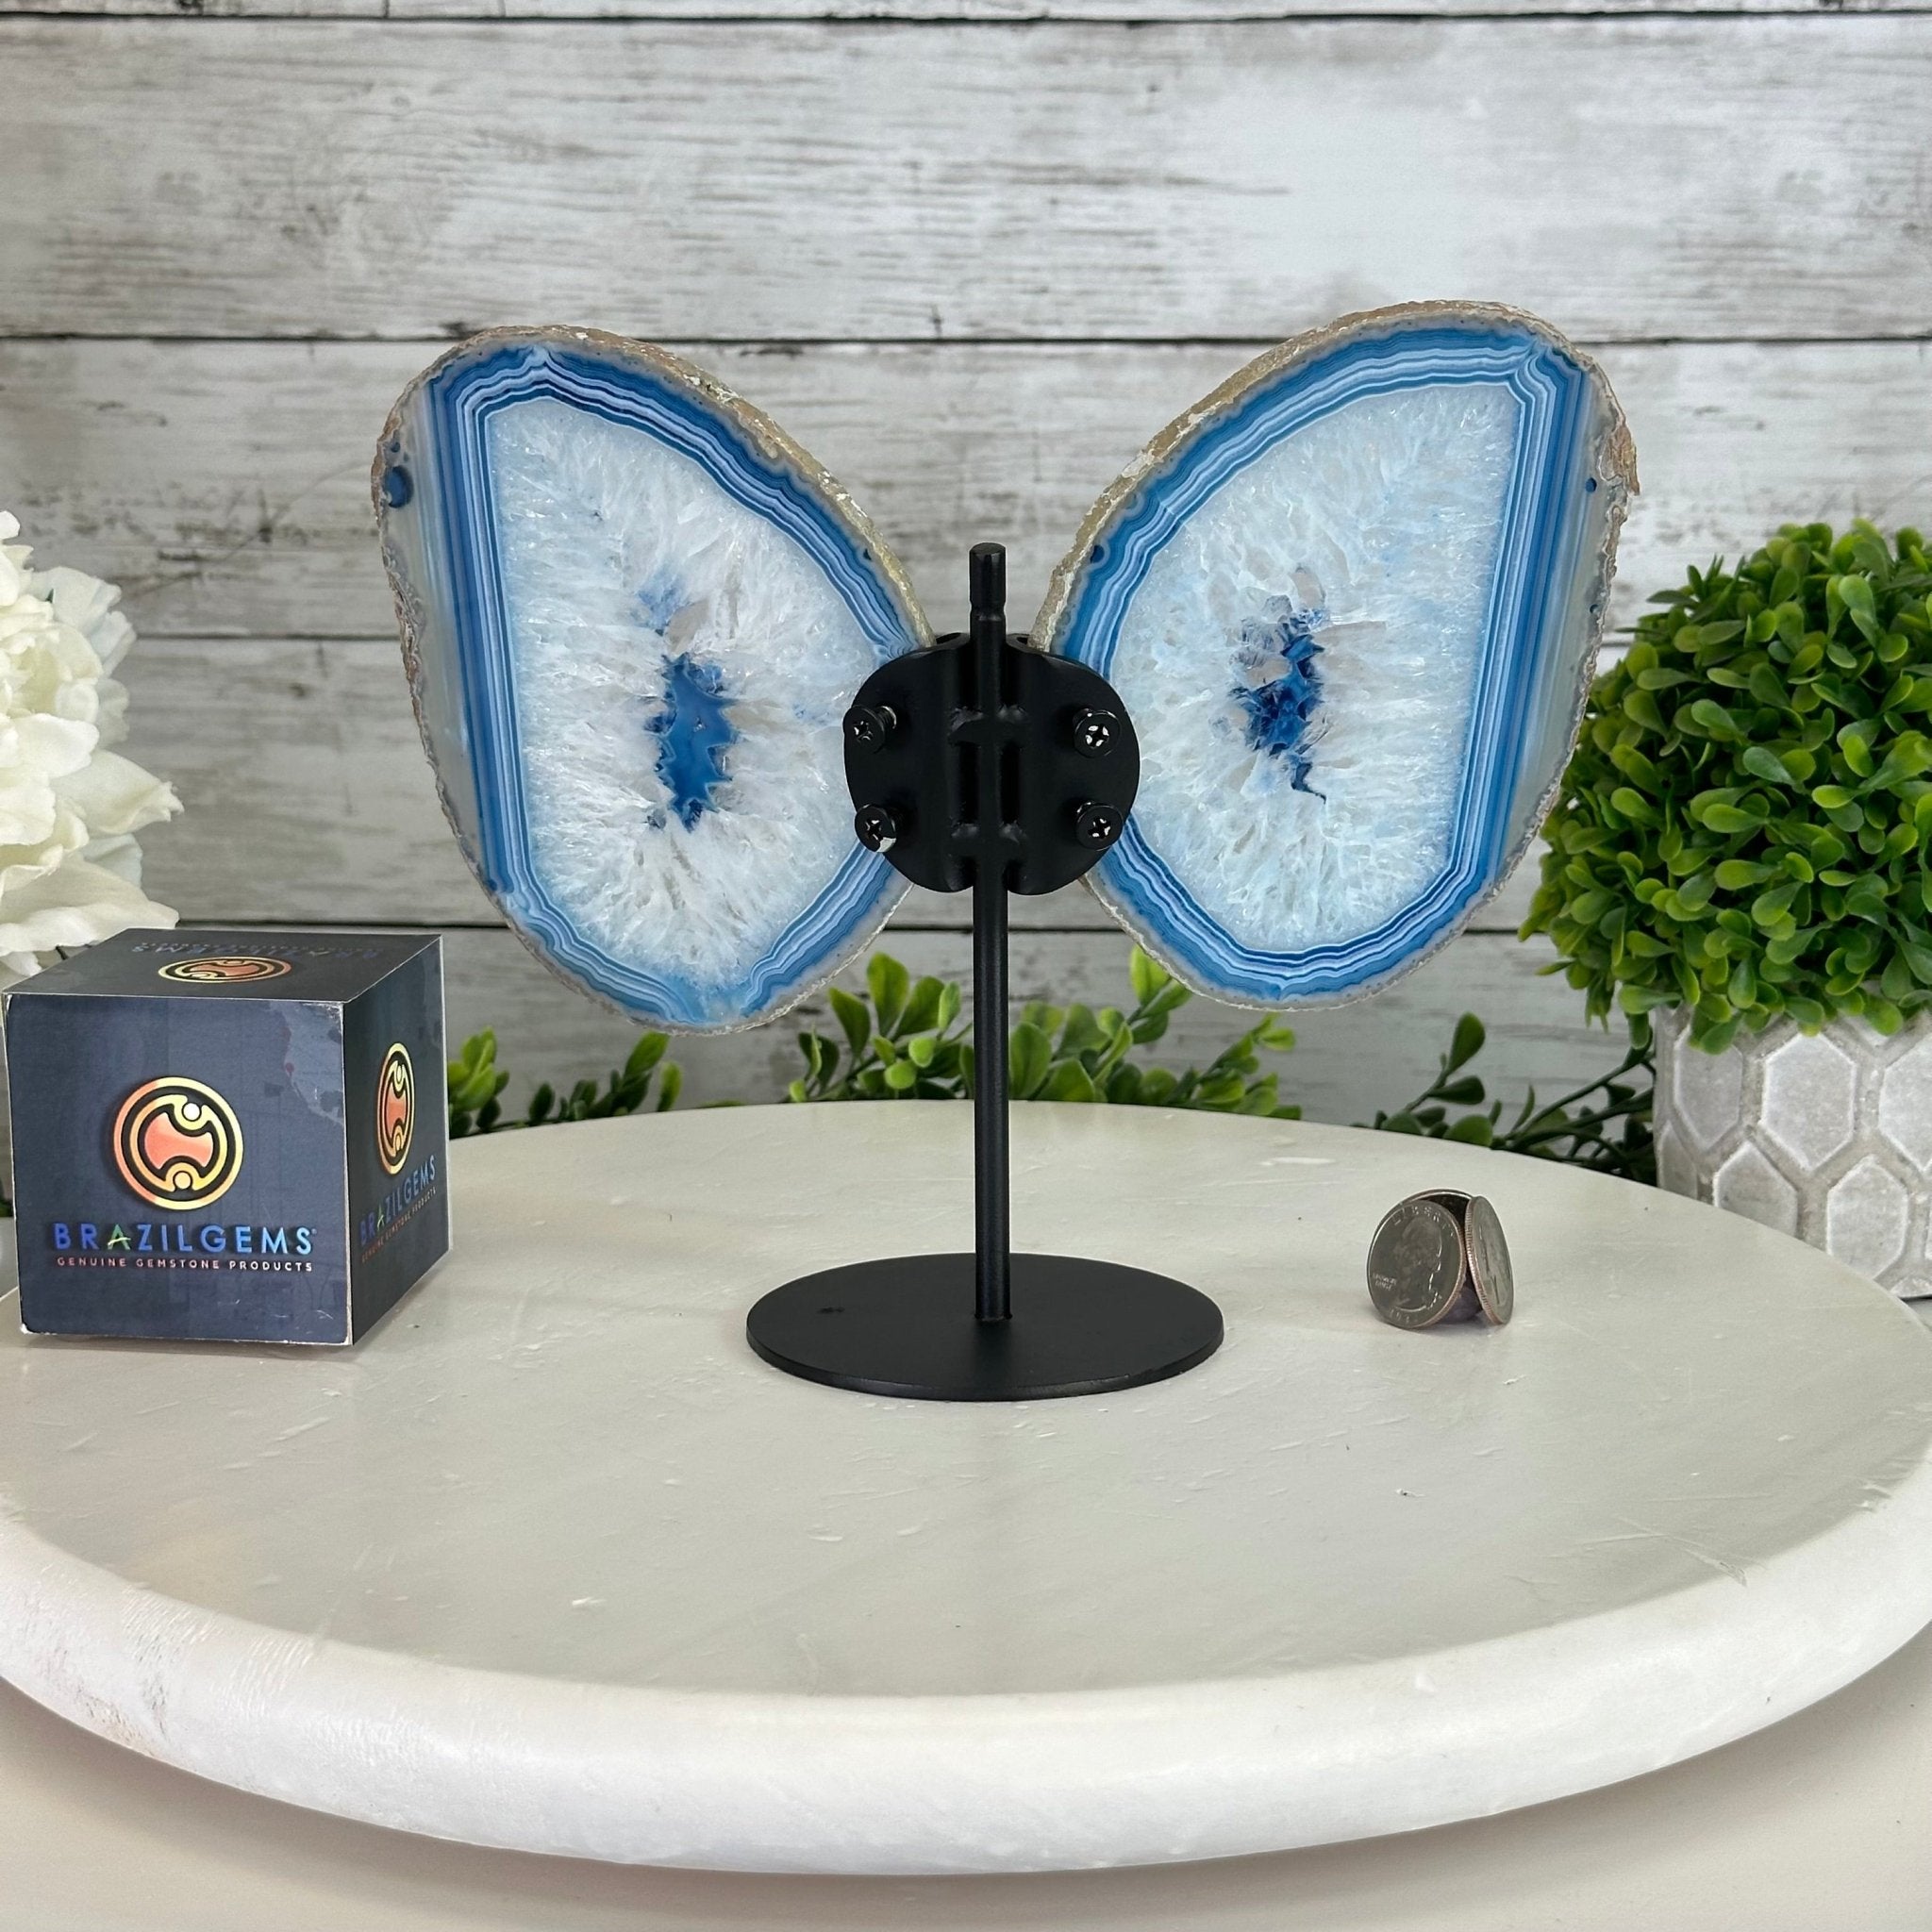 Blue Agate "Butterfly Wings" on stand, 7.2" Tall #5050BL-067 - Brazil GemsBrazil GemsBlue Agate "Butterfly Wings" on stand, 7.2" Tall #5050BL-067Agate Butterfly Wings5050BL-067